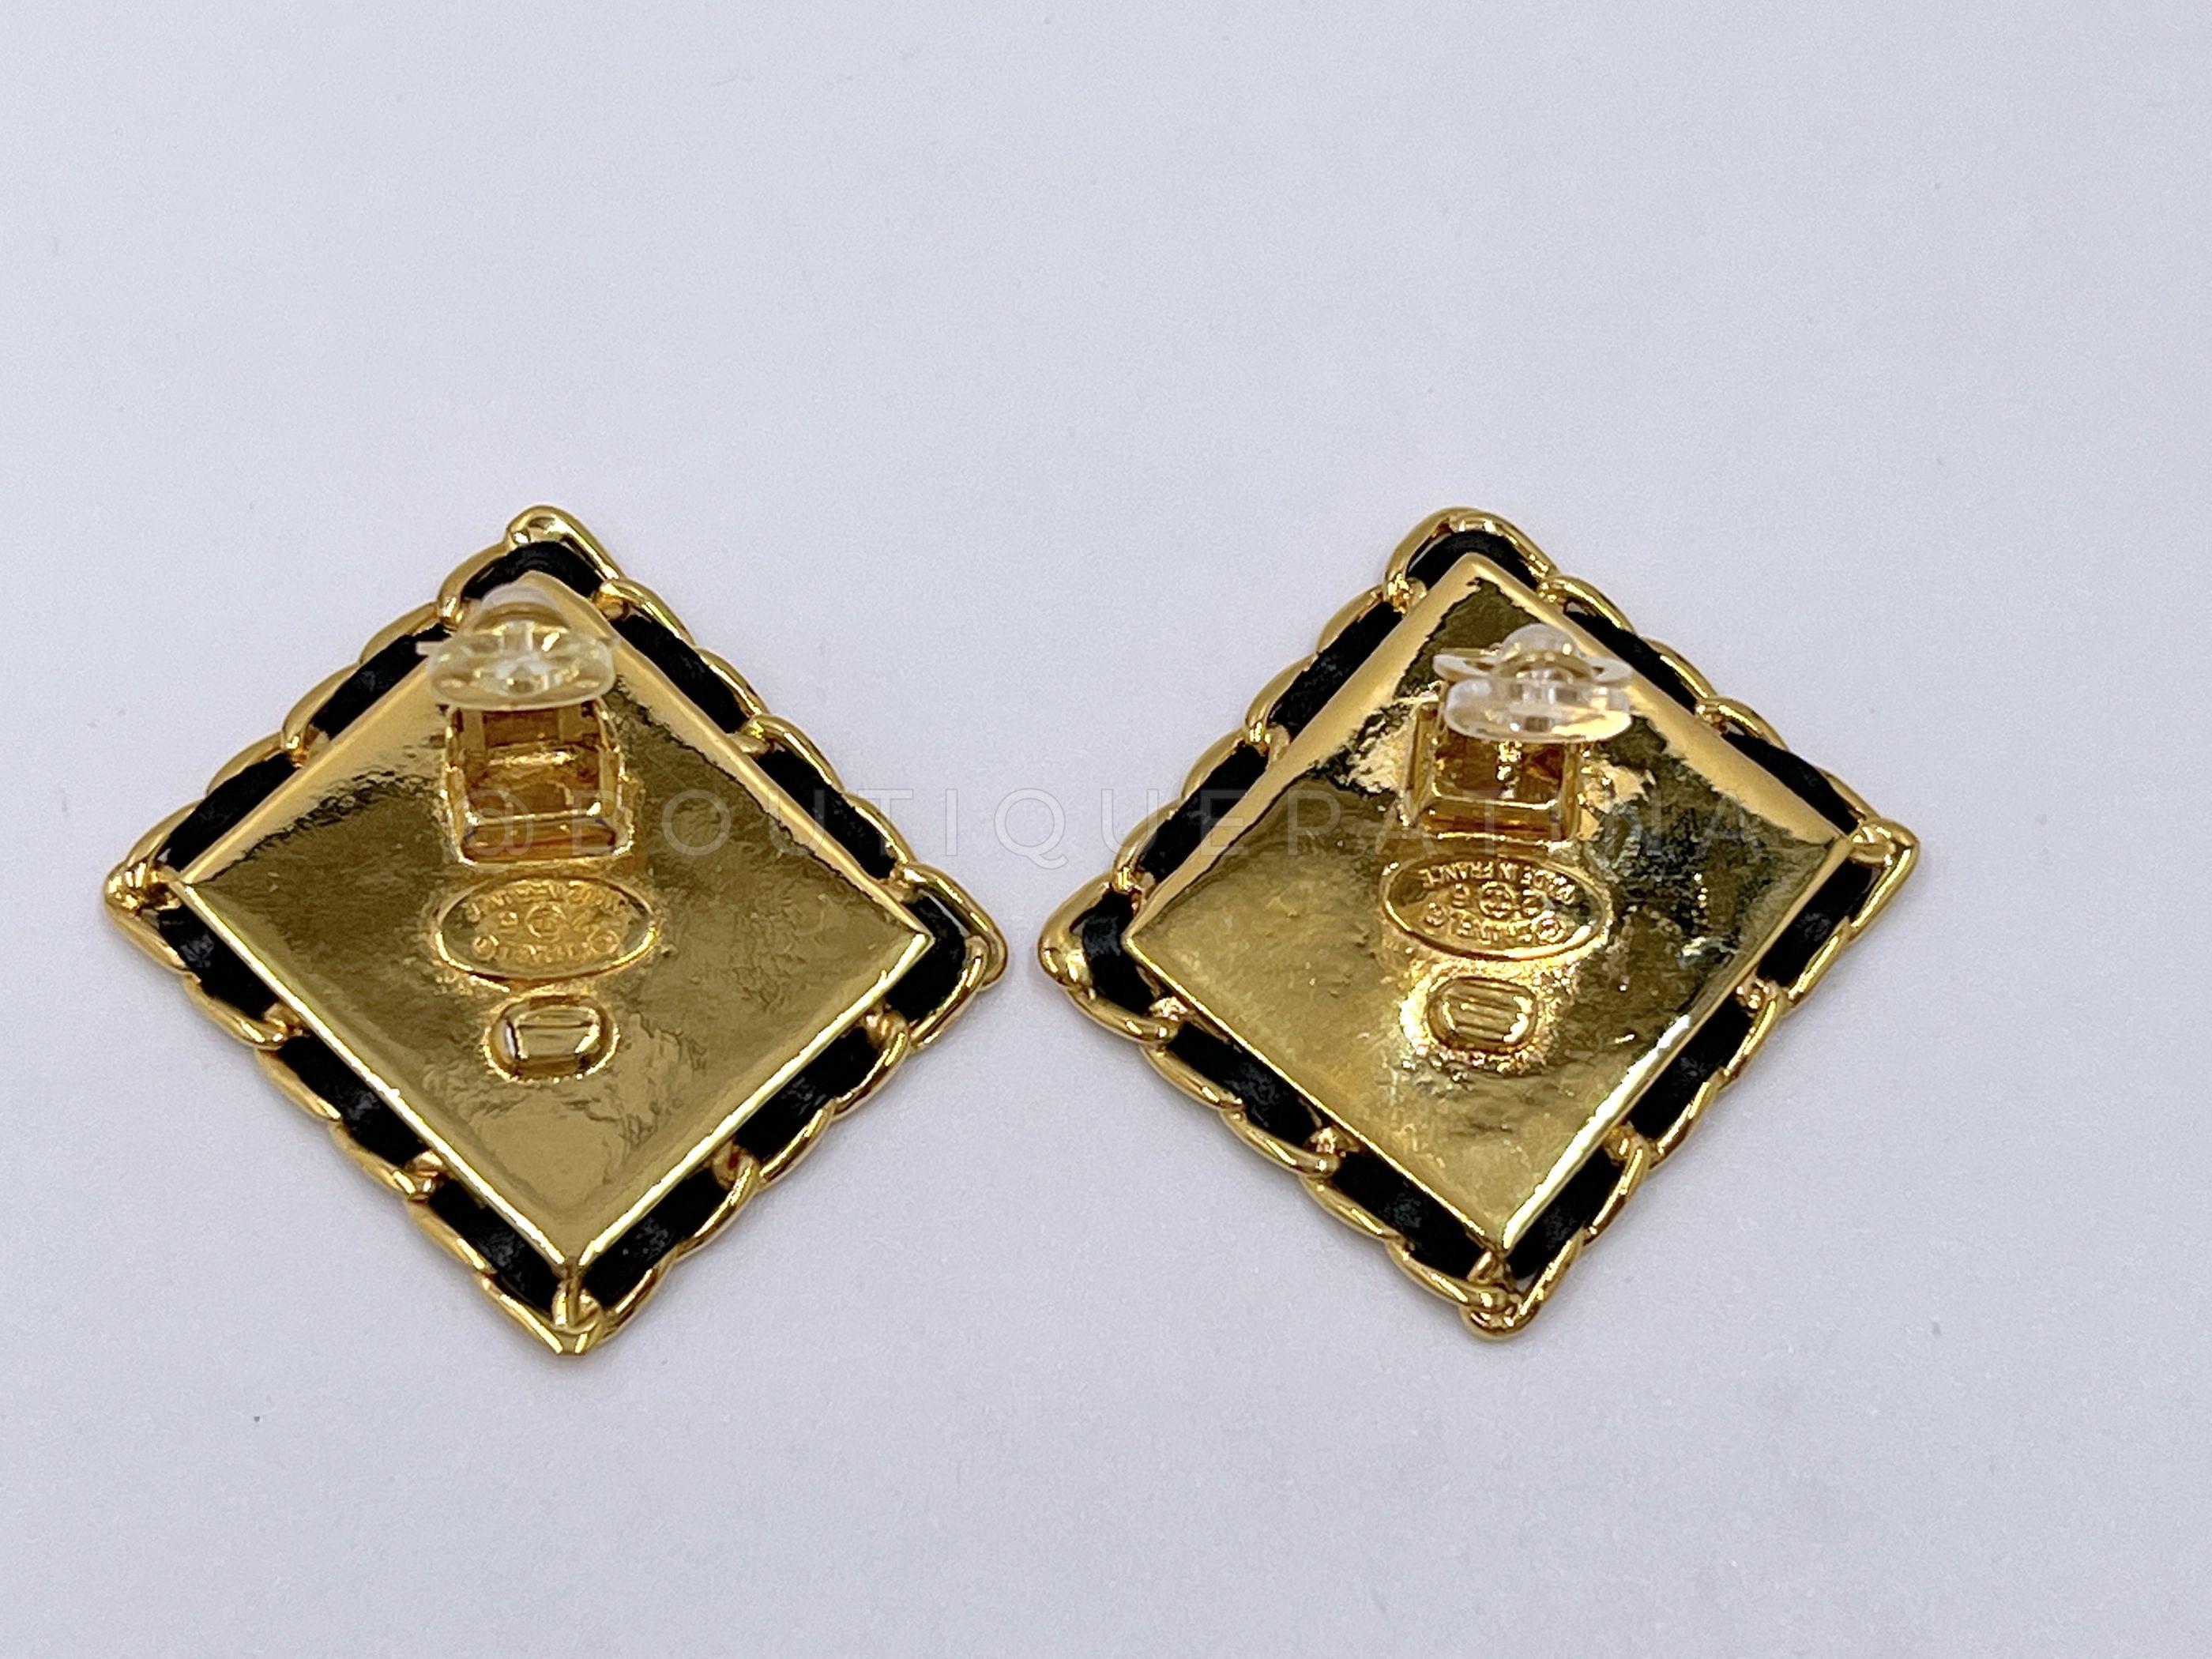 Store SKU: 65924
Chanel Vintage Collection 26 Square CC Logo Woven Chain Framed Giant Stud Earrings

The clips are positioned so that the earrings hang diagonally from the ear. Brushed gold plated metal surface and woven chain border. 

Measures 1.5